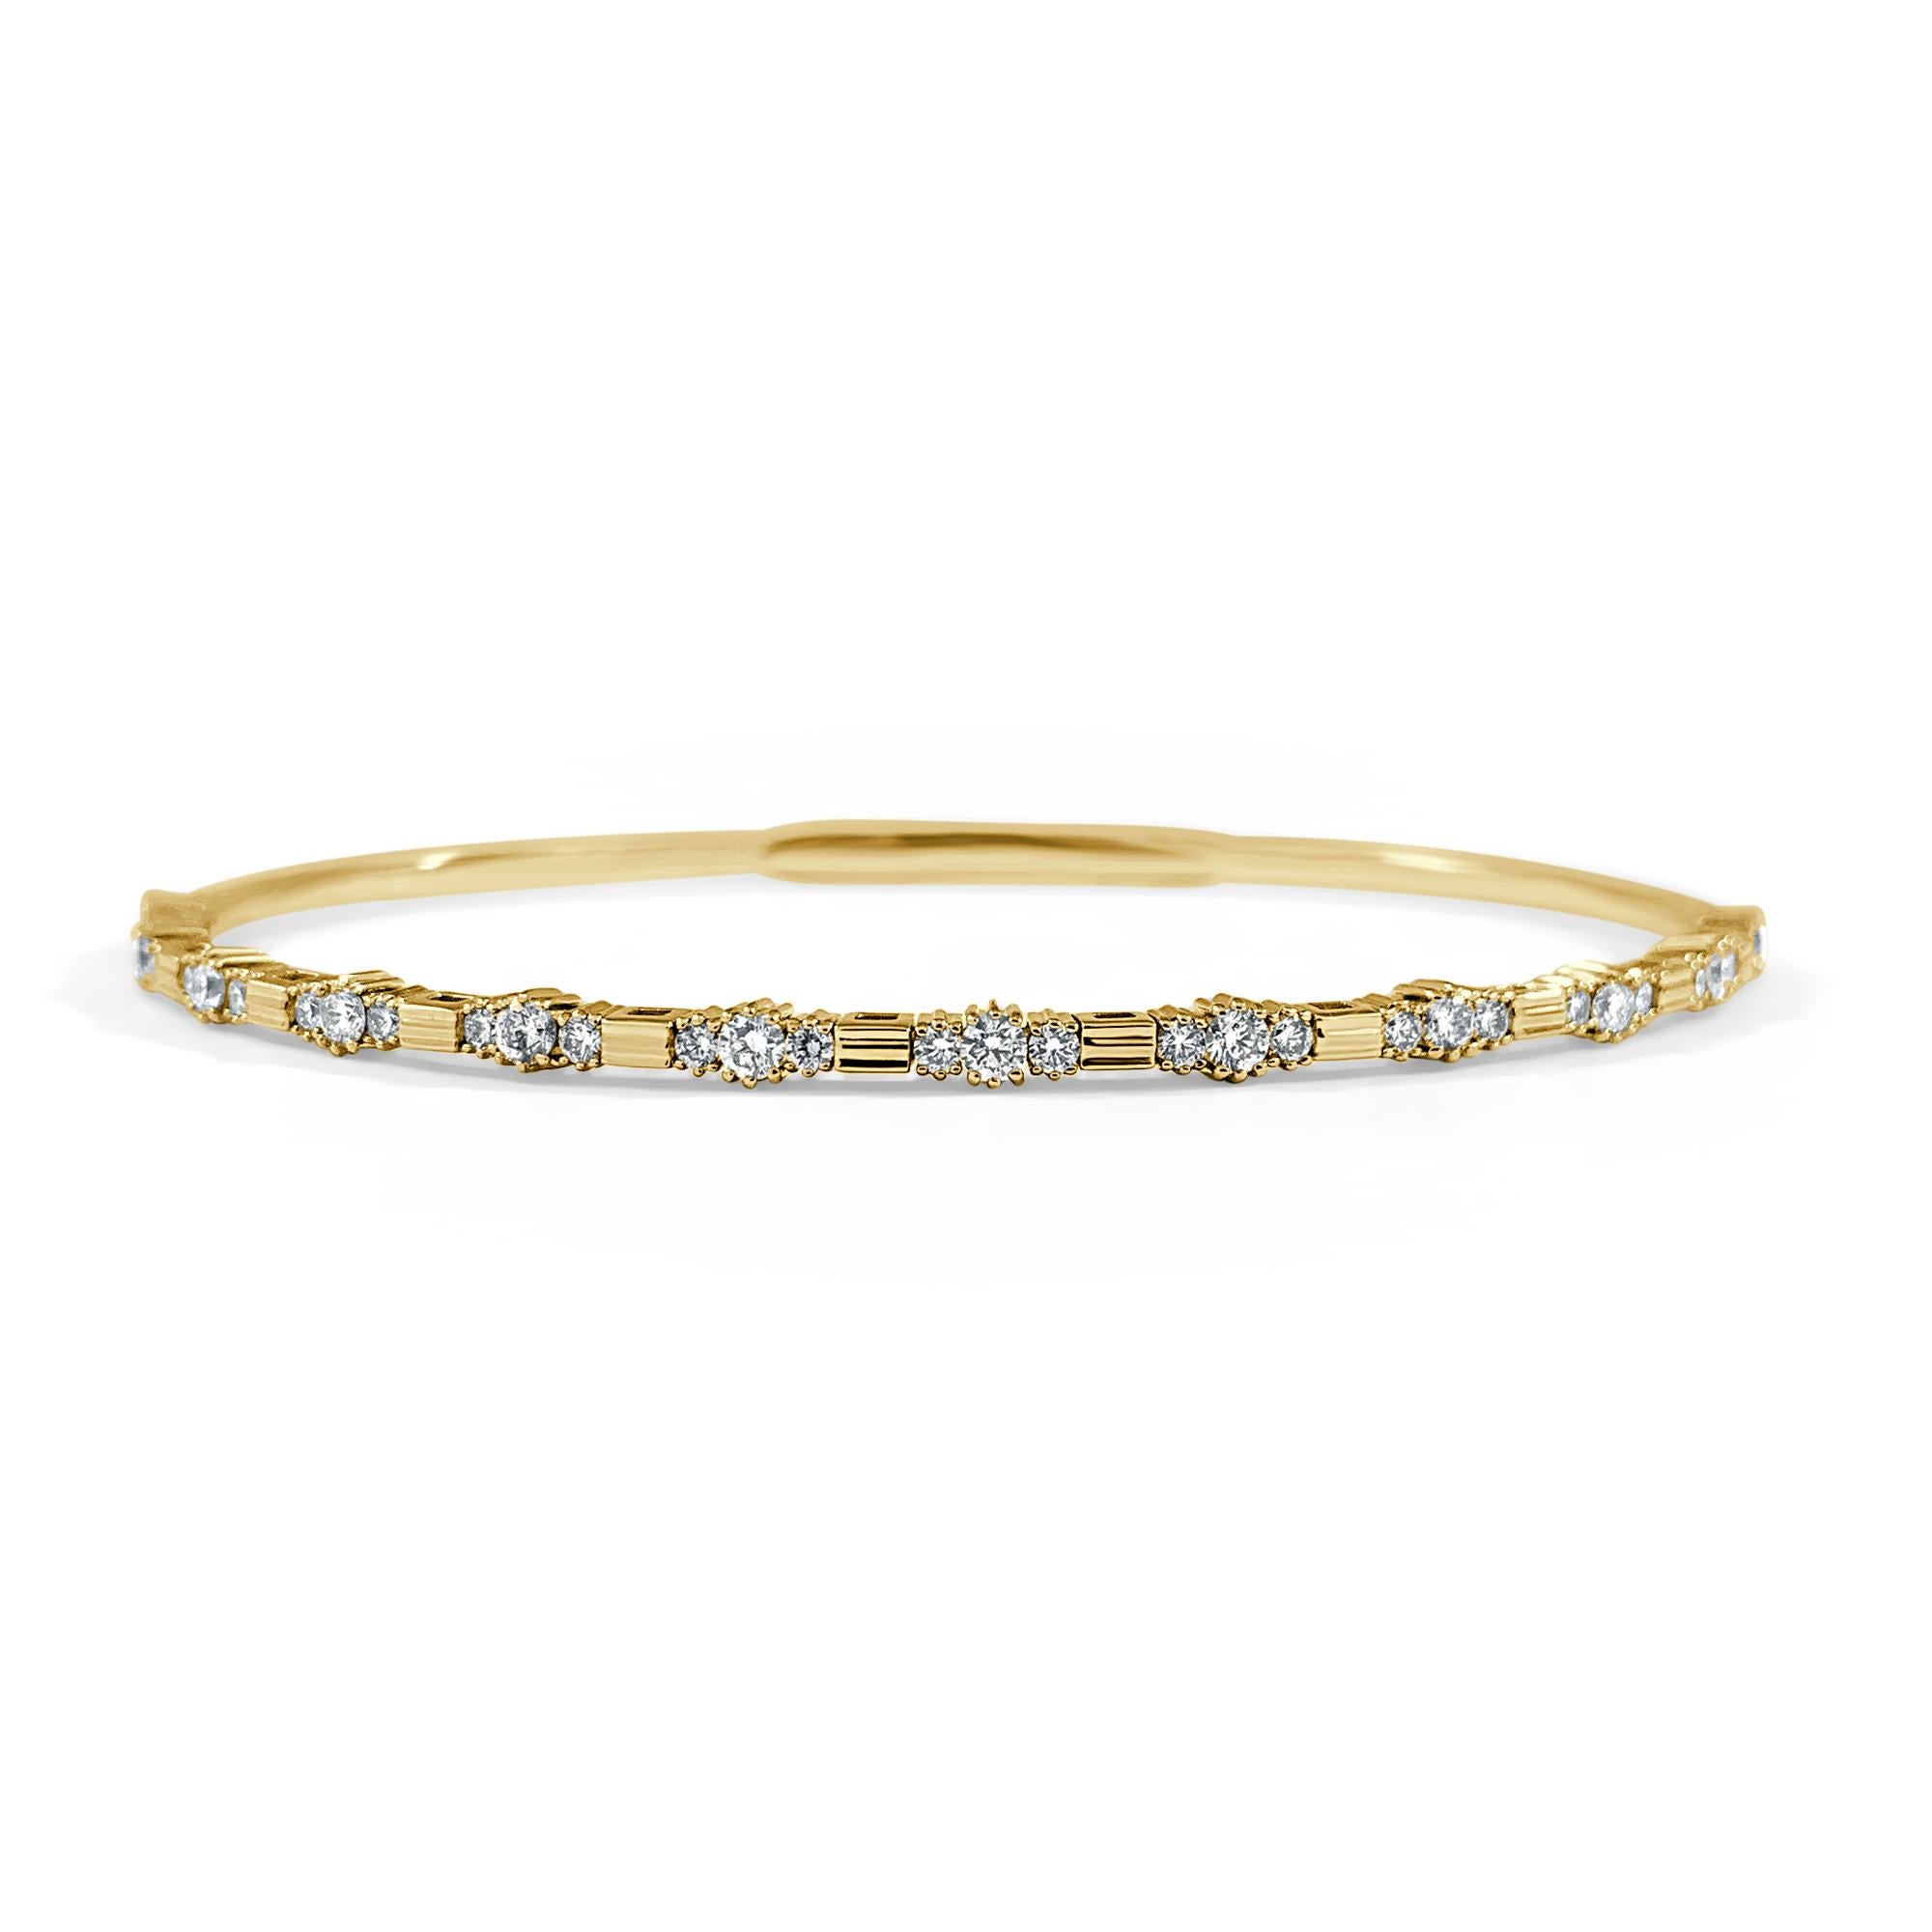  Quality Flexible Stackable Bangle: Made from real 14k gold and 76 glittering white approximately 3/4 cts. Certified diamonds, featuring a single row of white diamonds flexible diameter for comfort with a color and clarity of GH-SI
 Surprise Your